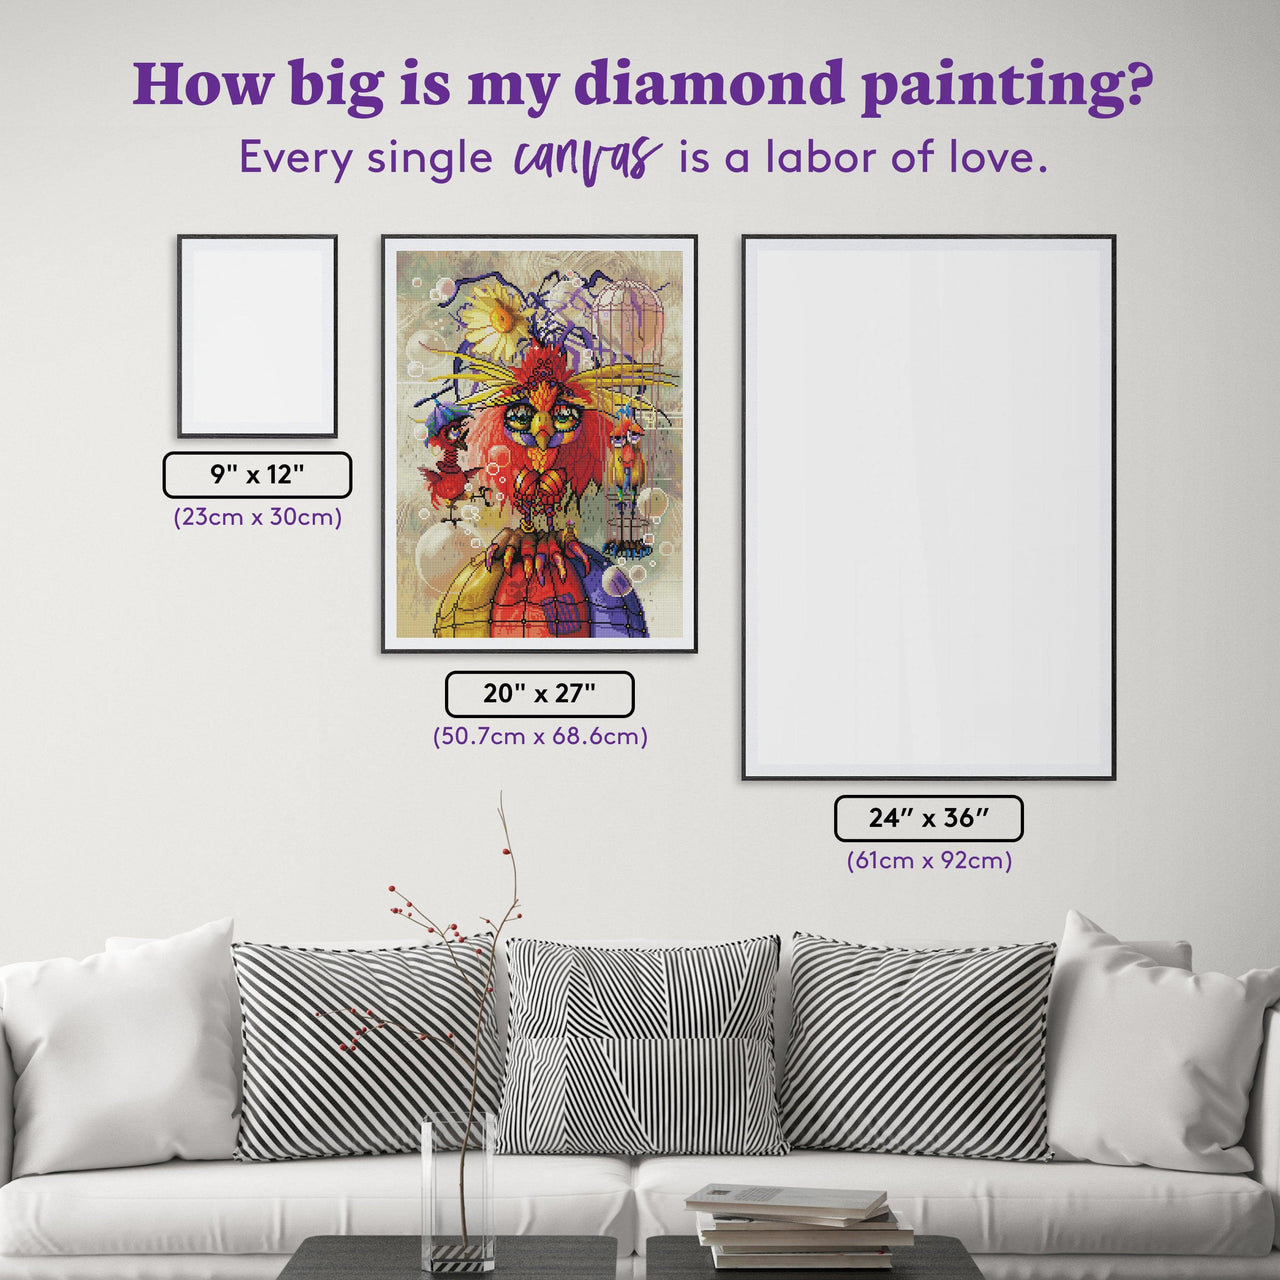 Diamond Painting Agnus - One Hot Mess! 20" x 27" (50.7cm x 68.6cm) / Round with 59 Colors including 5 ABs / 44,345